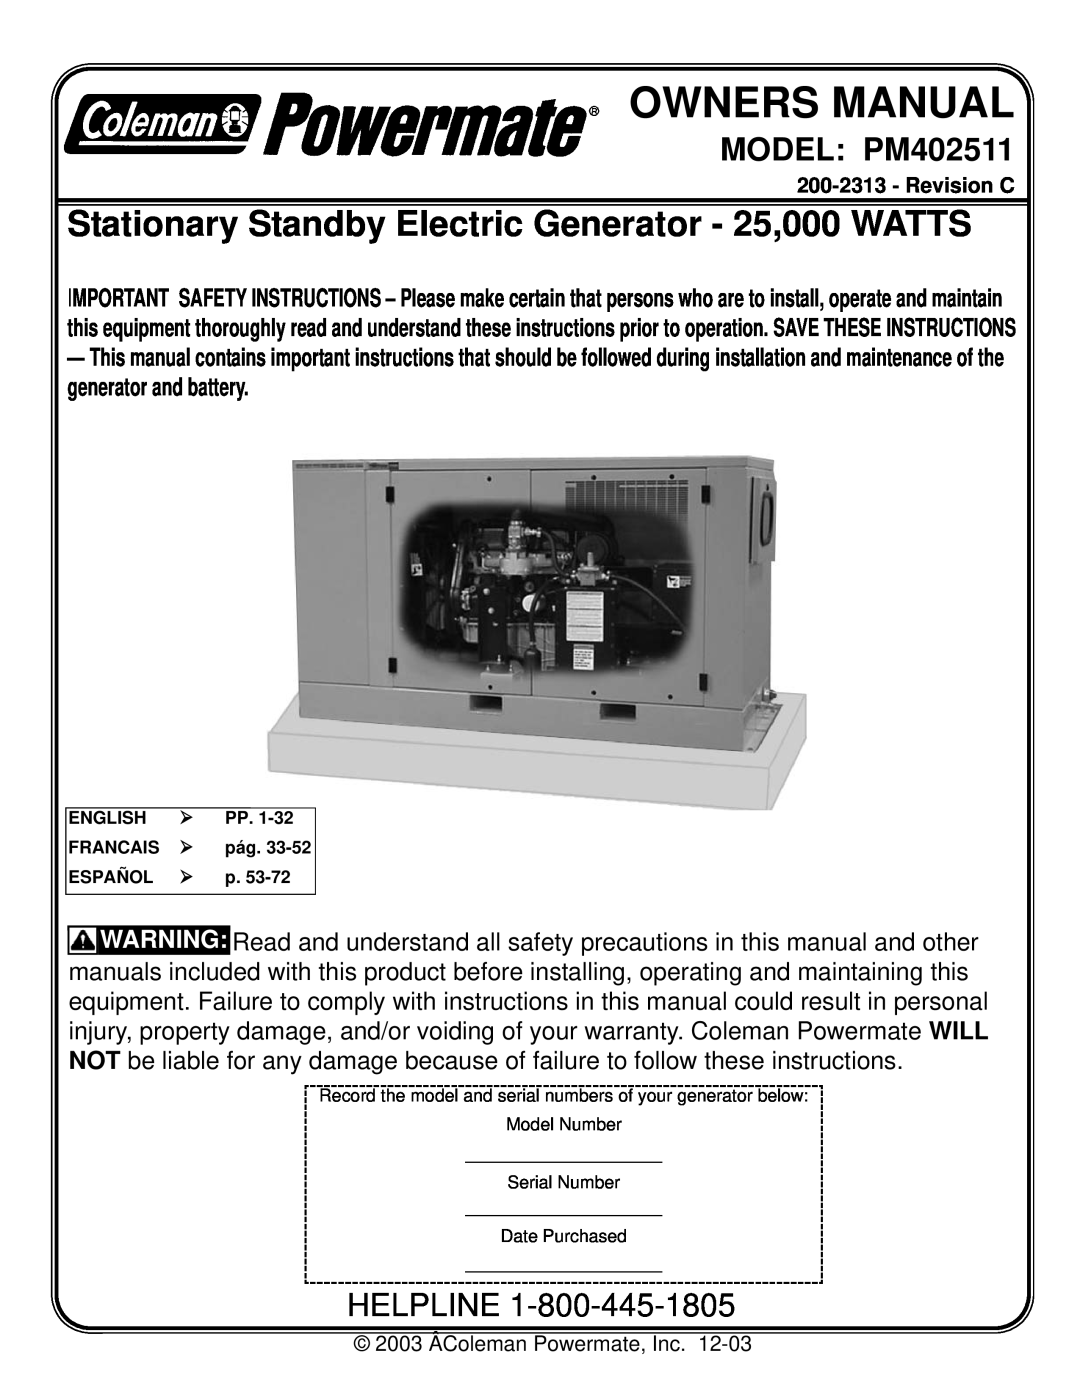 Coleman owner manual Owners Manual, Stationary Standby Electric Generator - 25,000 WATTS, MODEL PM402511, Helpline 